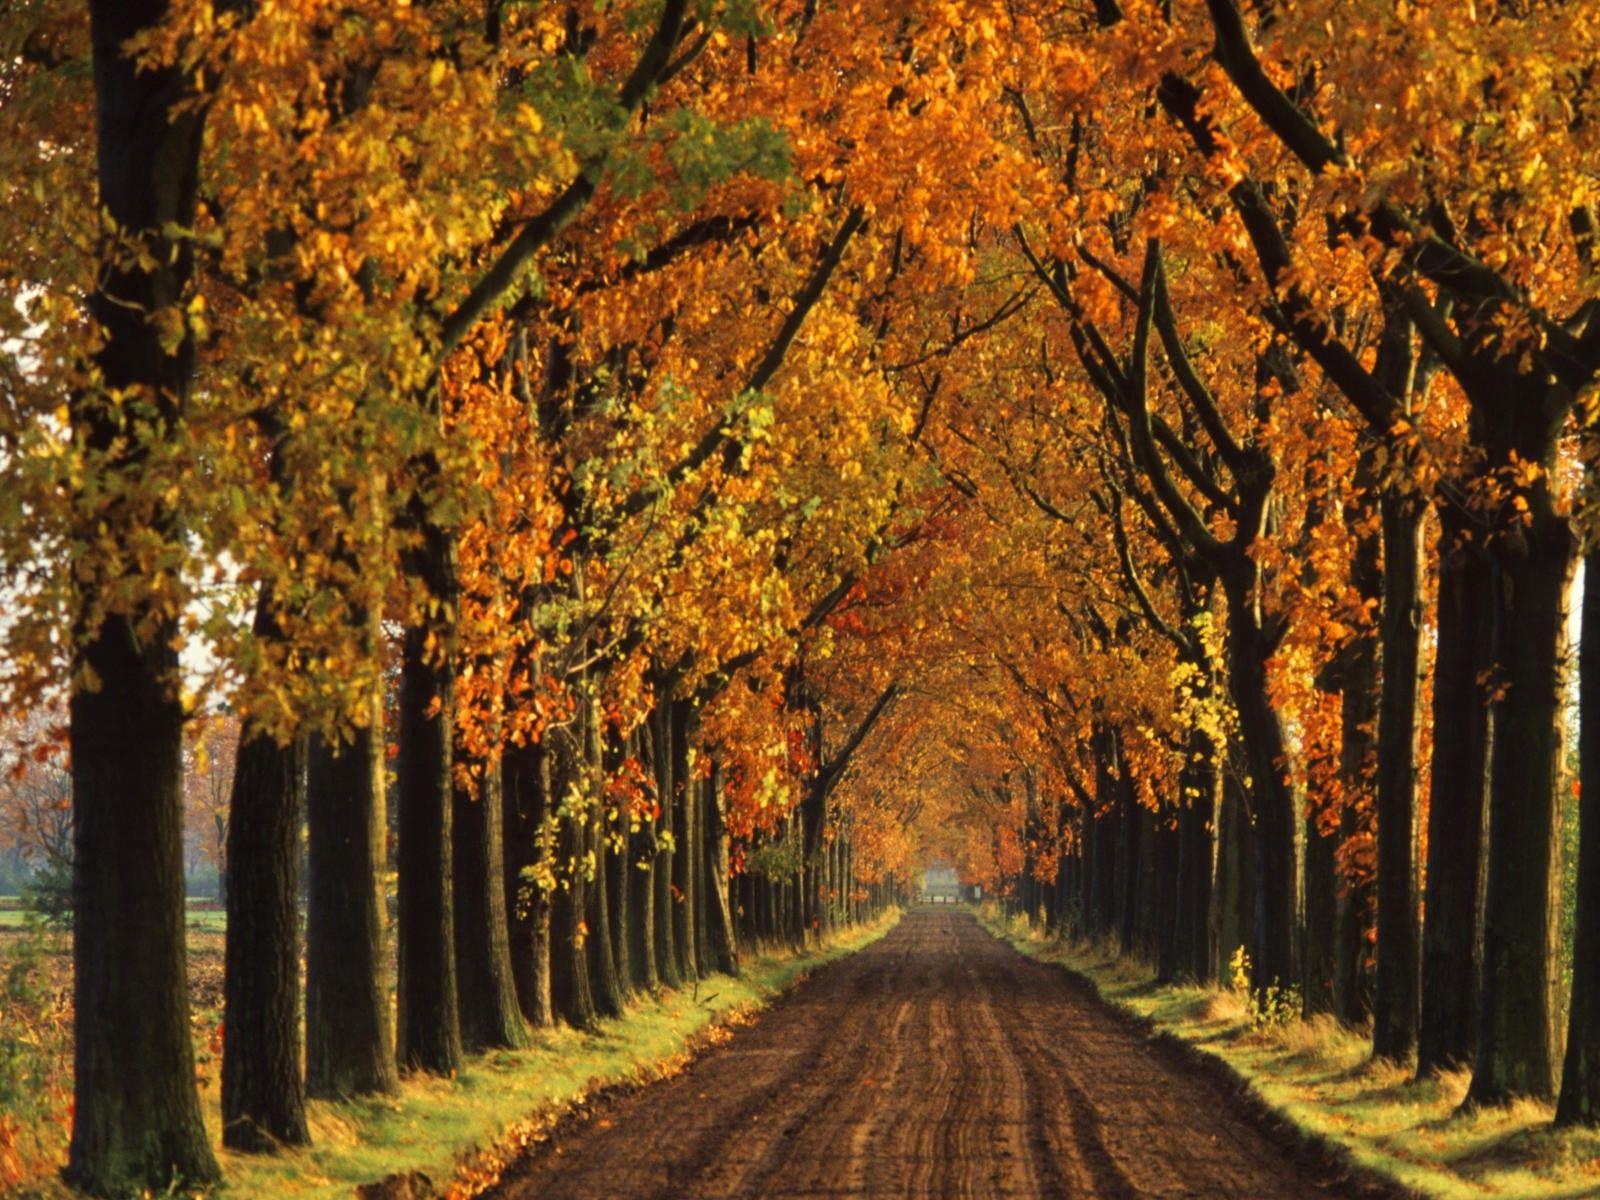 Fall Picture For Desktop. IMAGE SOURCE PAGE Fall Desktop Wallpaper Phot. Desktop Wallpaper Fall, Tree Lined Driveway, Free Fall Wallpaper